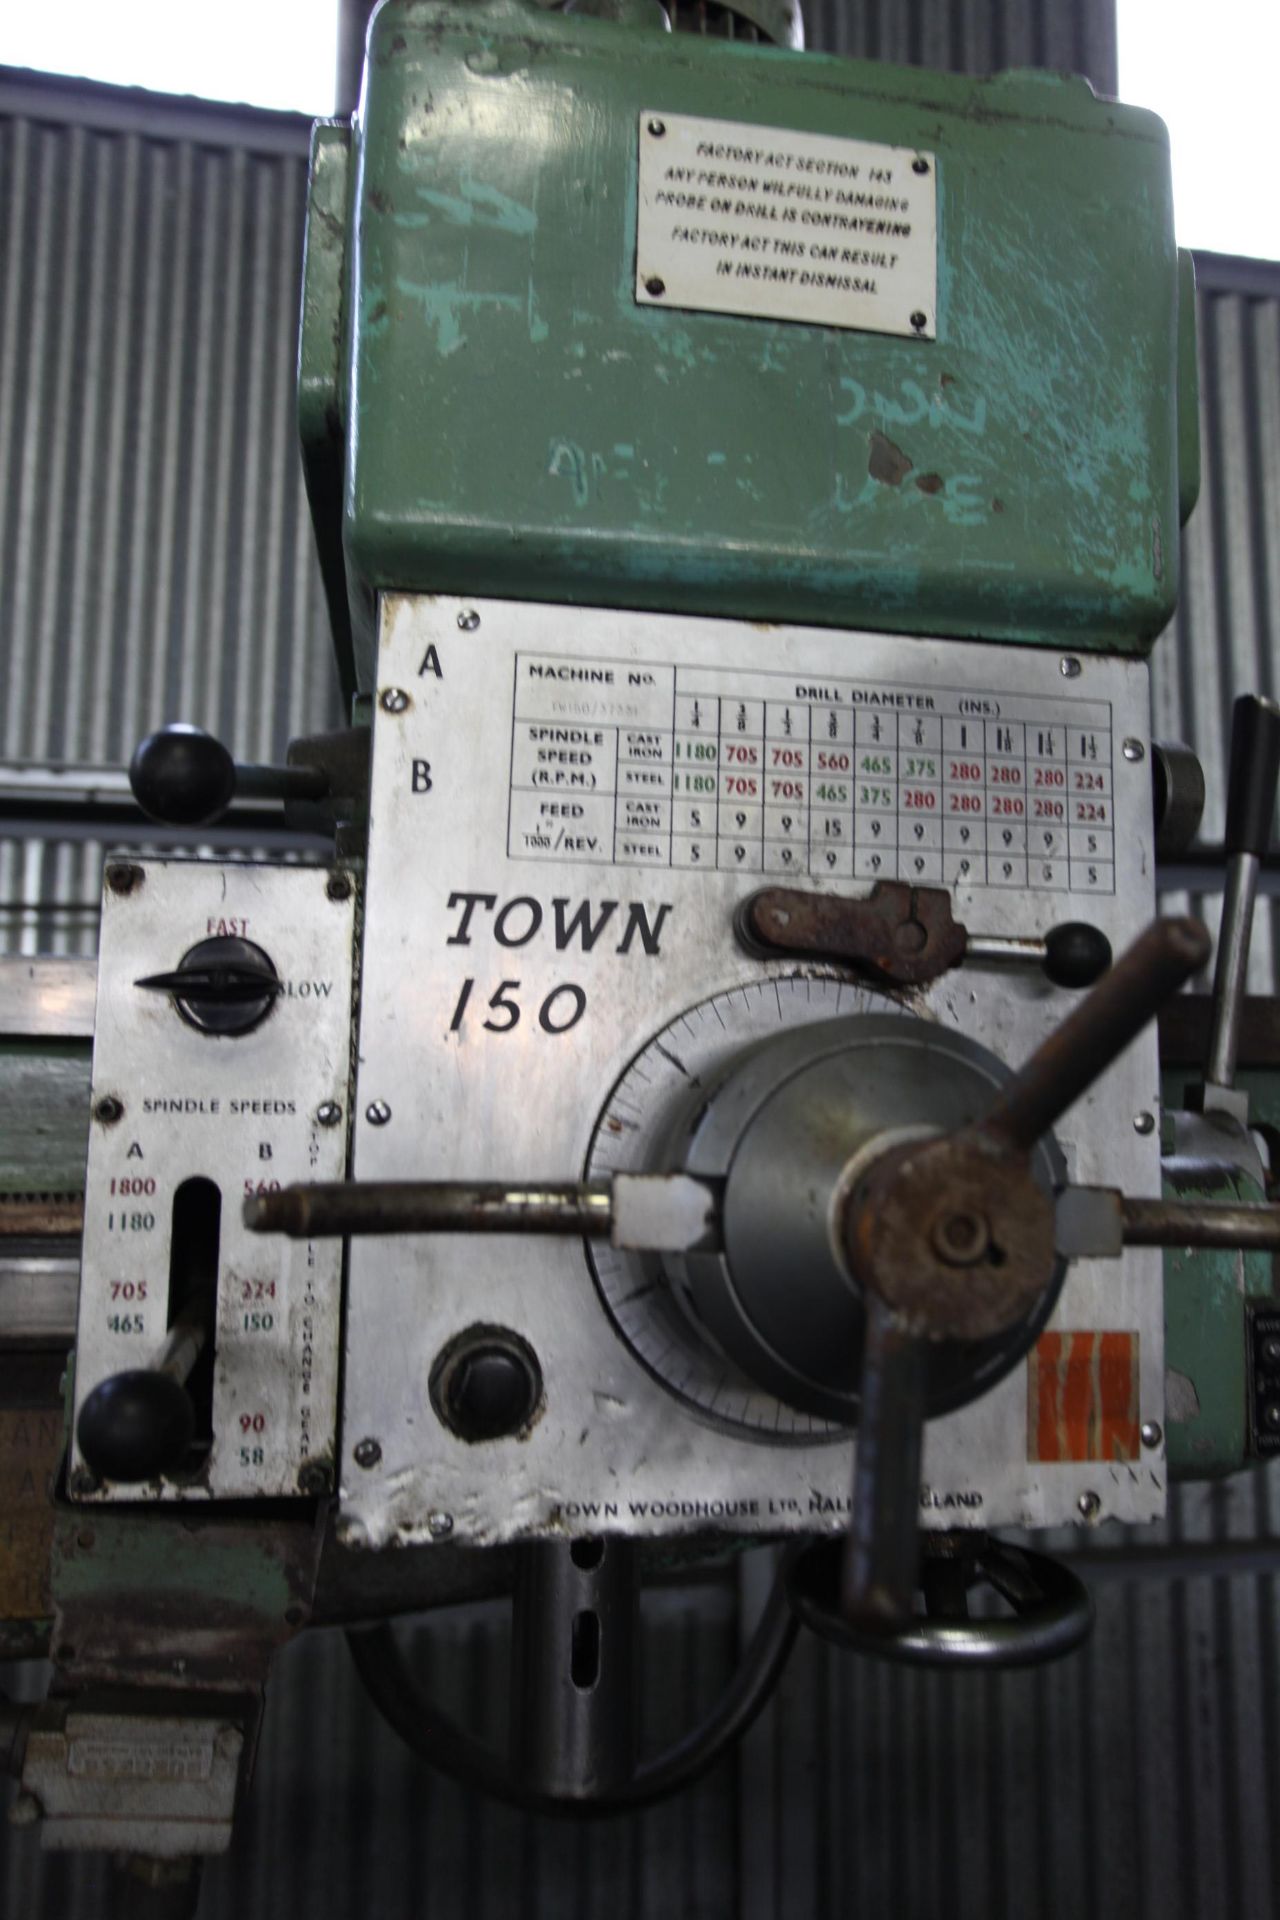 Town Woodhouse SM550 Radial Arm Drill, with rise & fall tilting table, serial no. 22/1740, free - Image 4 of 5